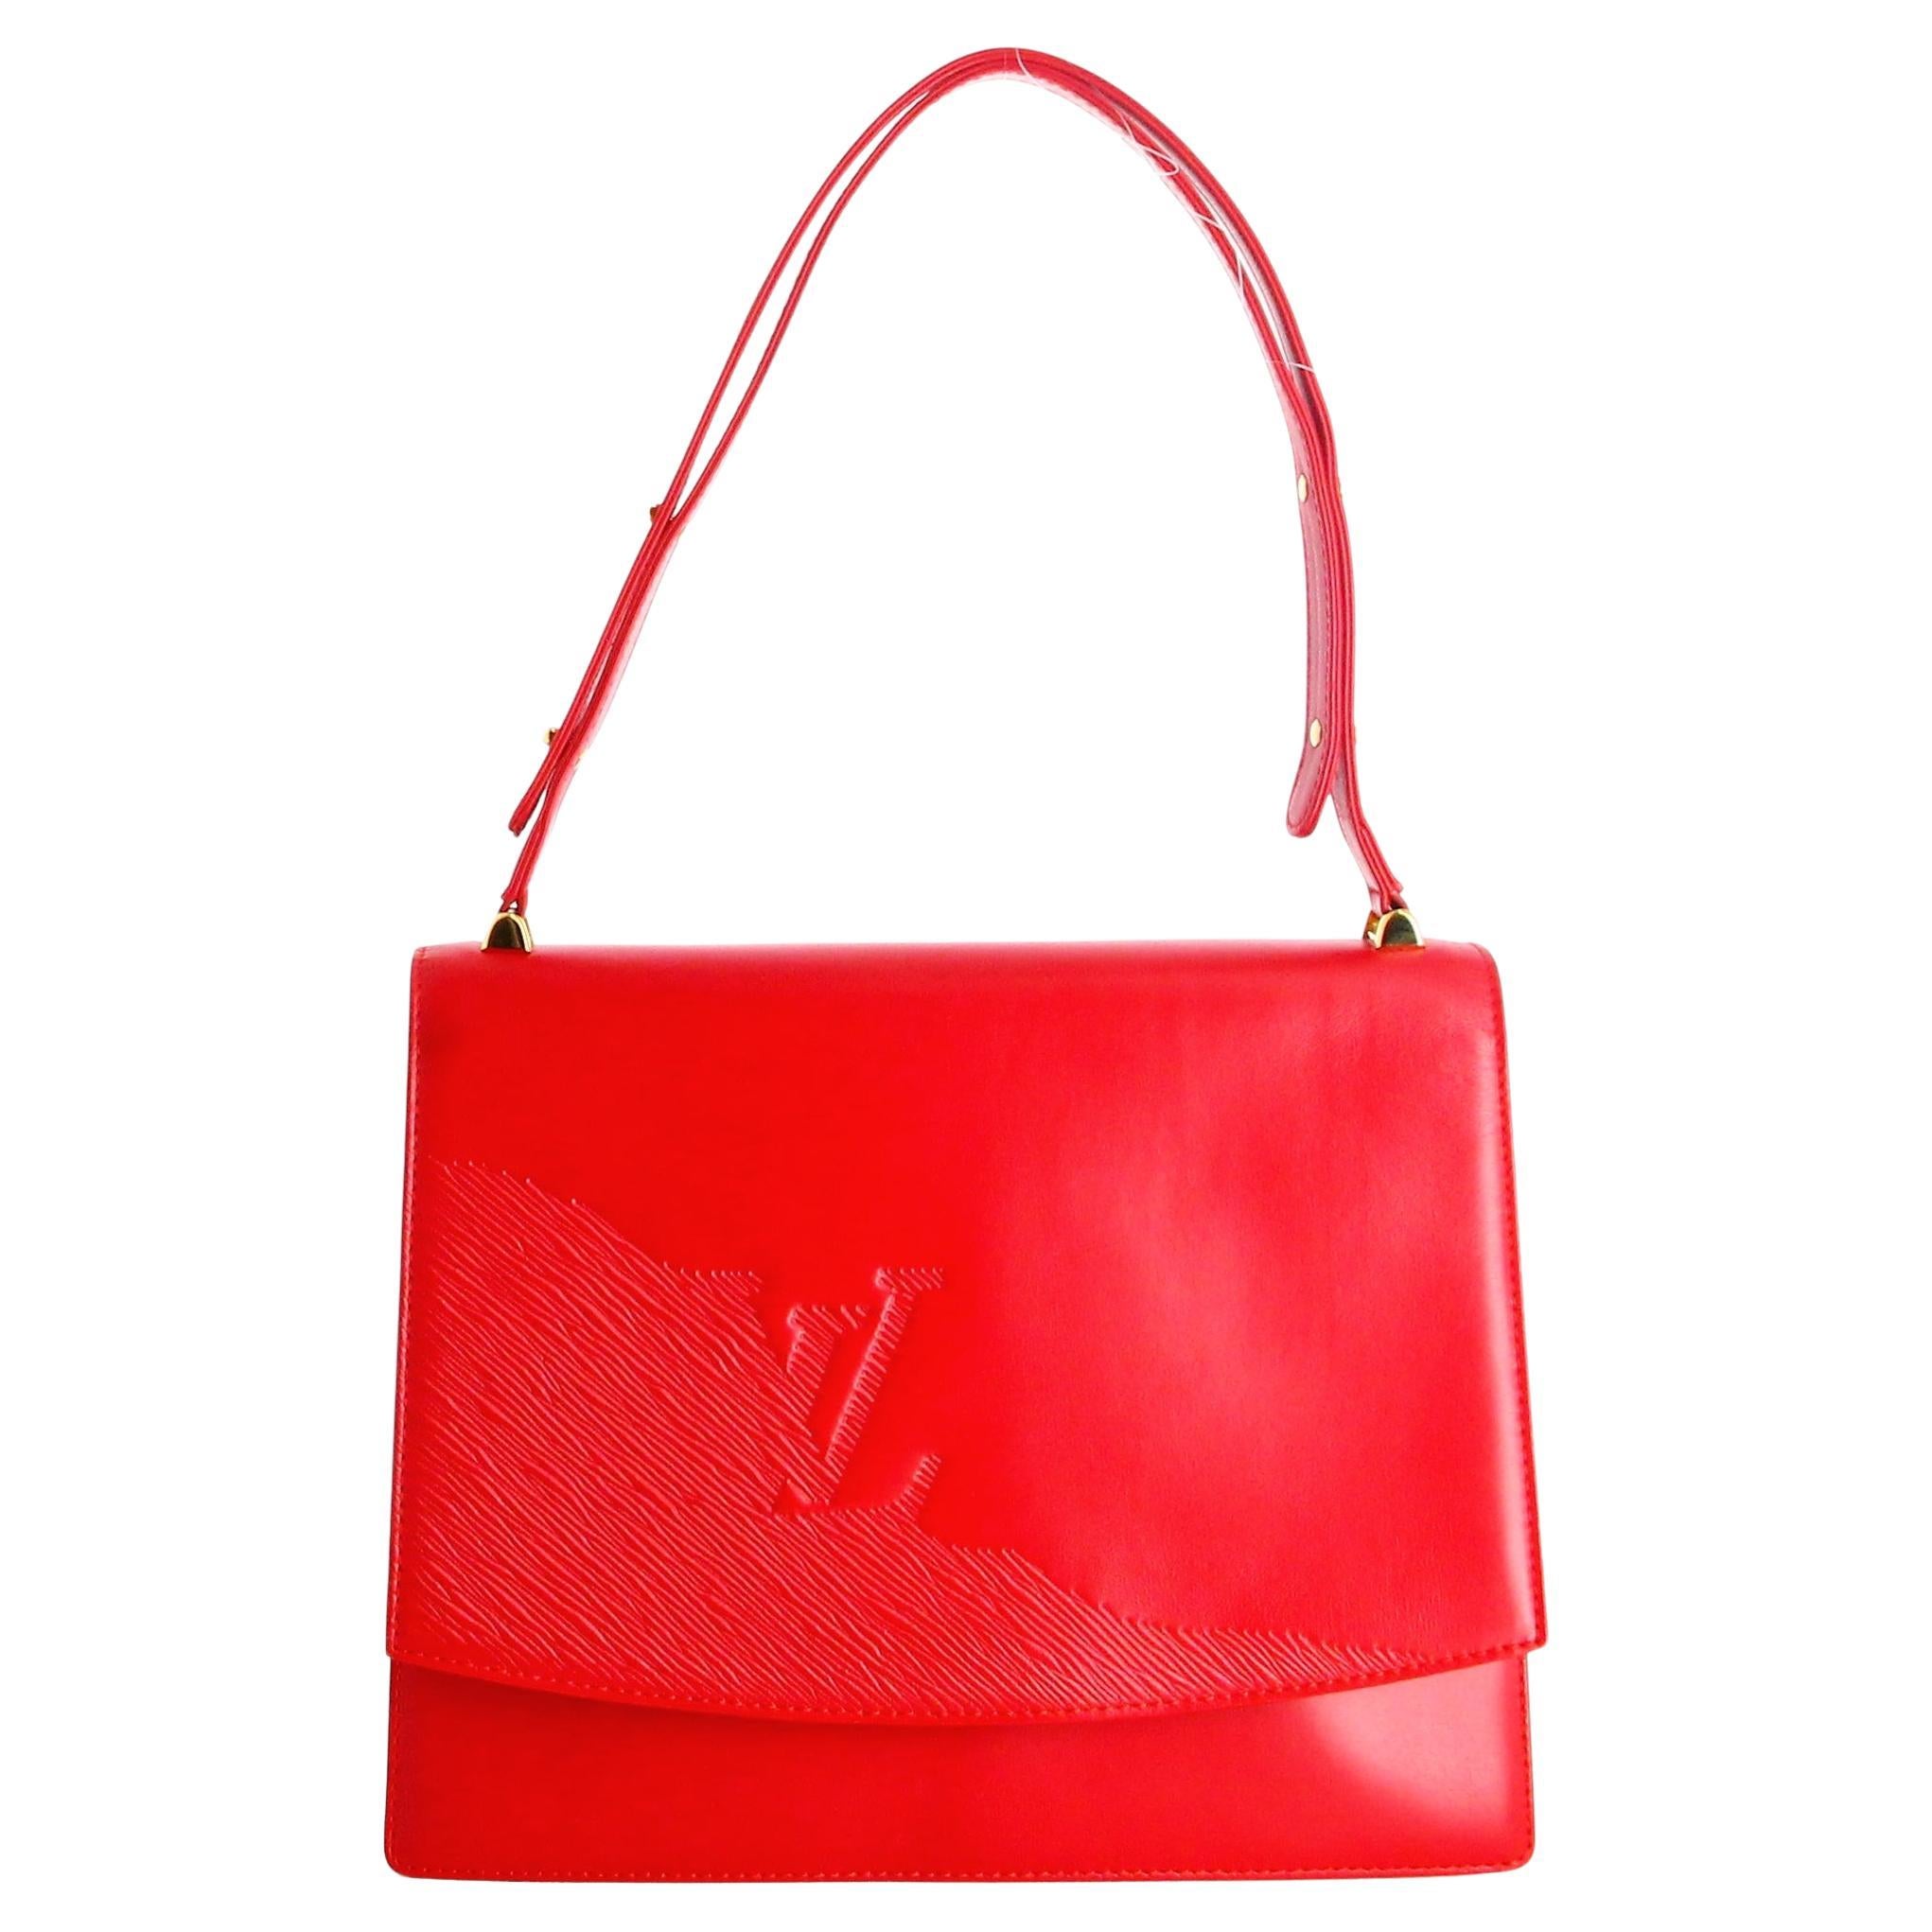 1991 Opera Louis Vuitton Red Leather Handbag  For Sale